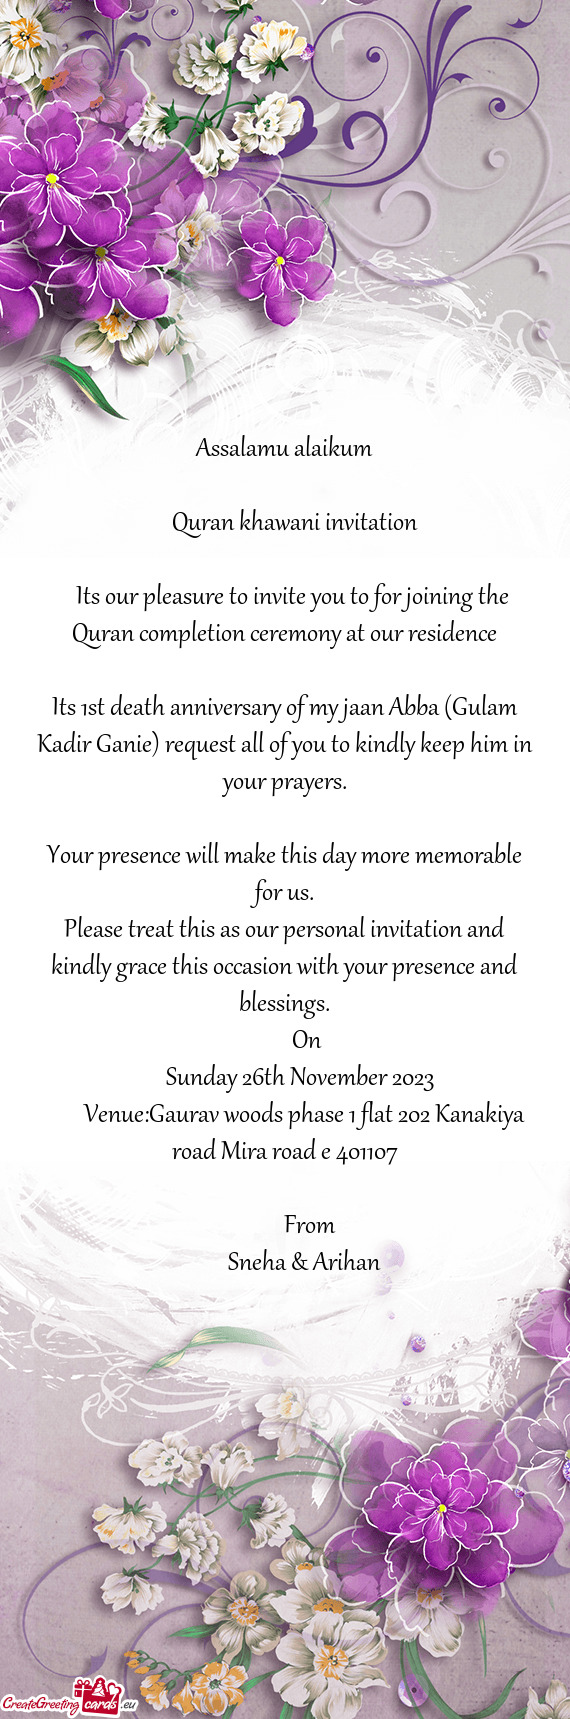 Its our pleasure to invite you to for joining the Quran completion ceremony at our residence